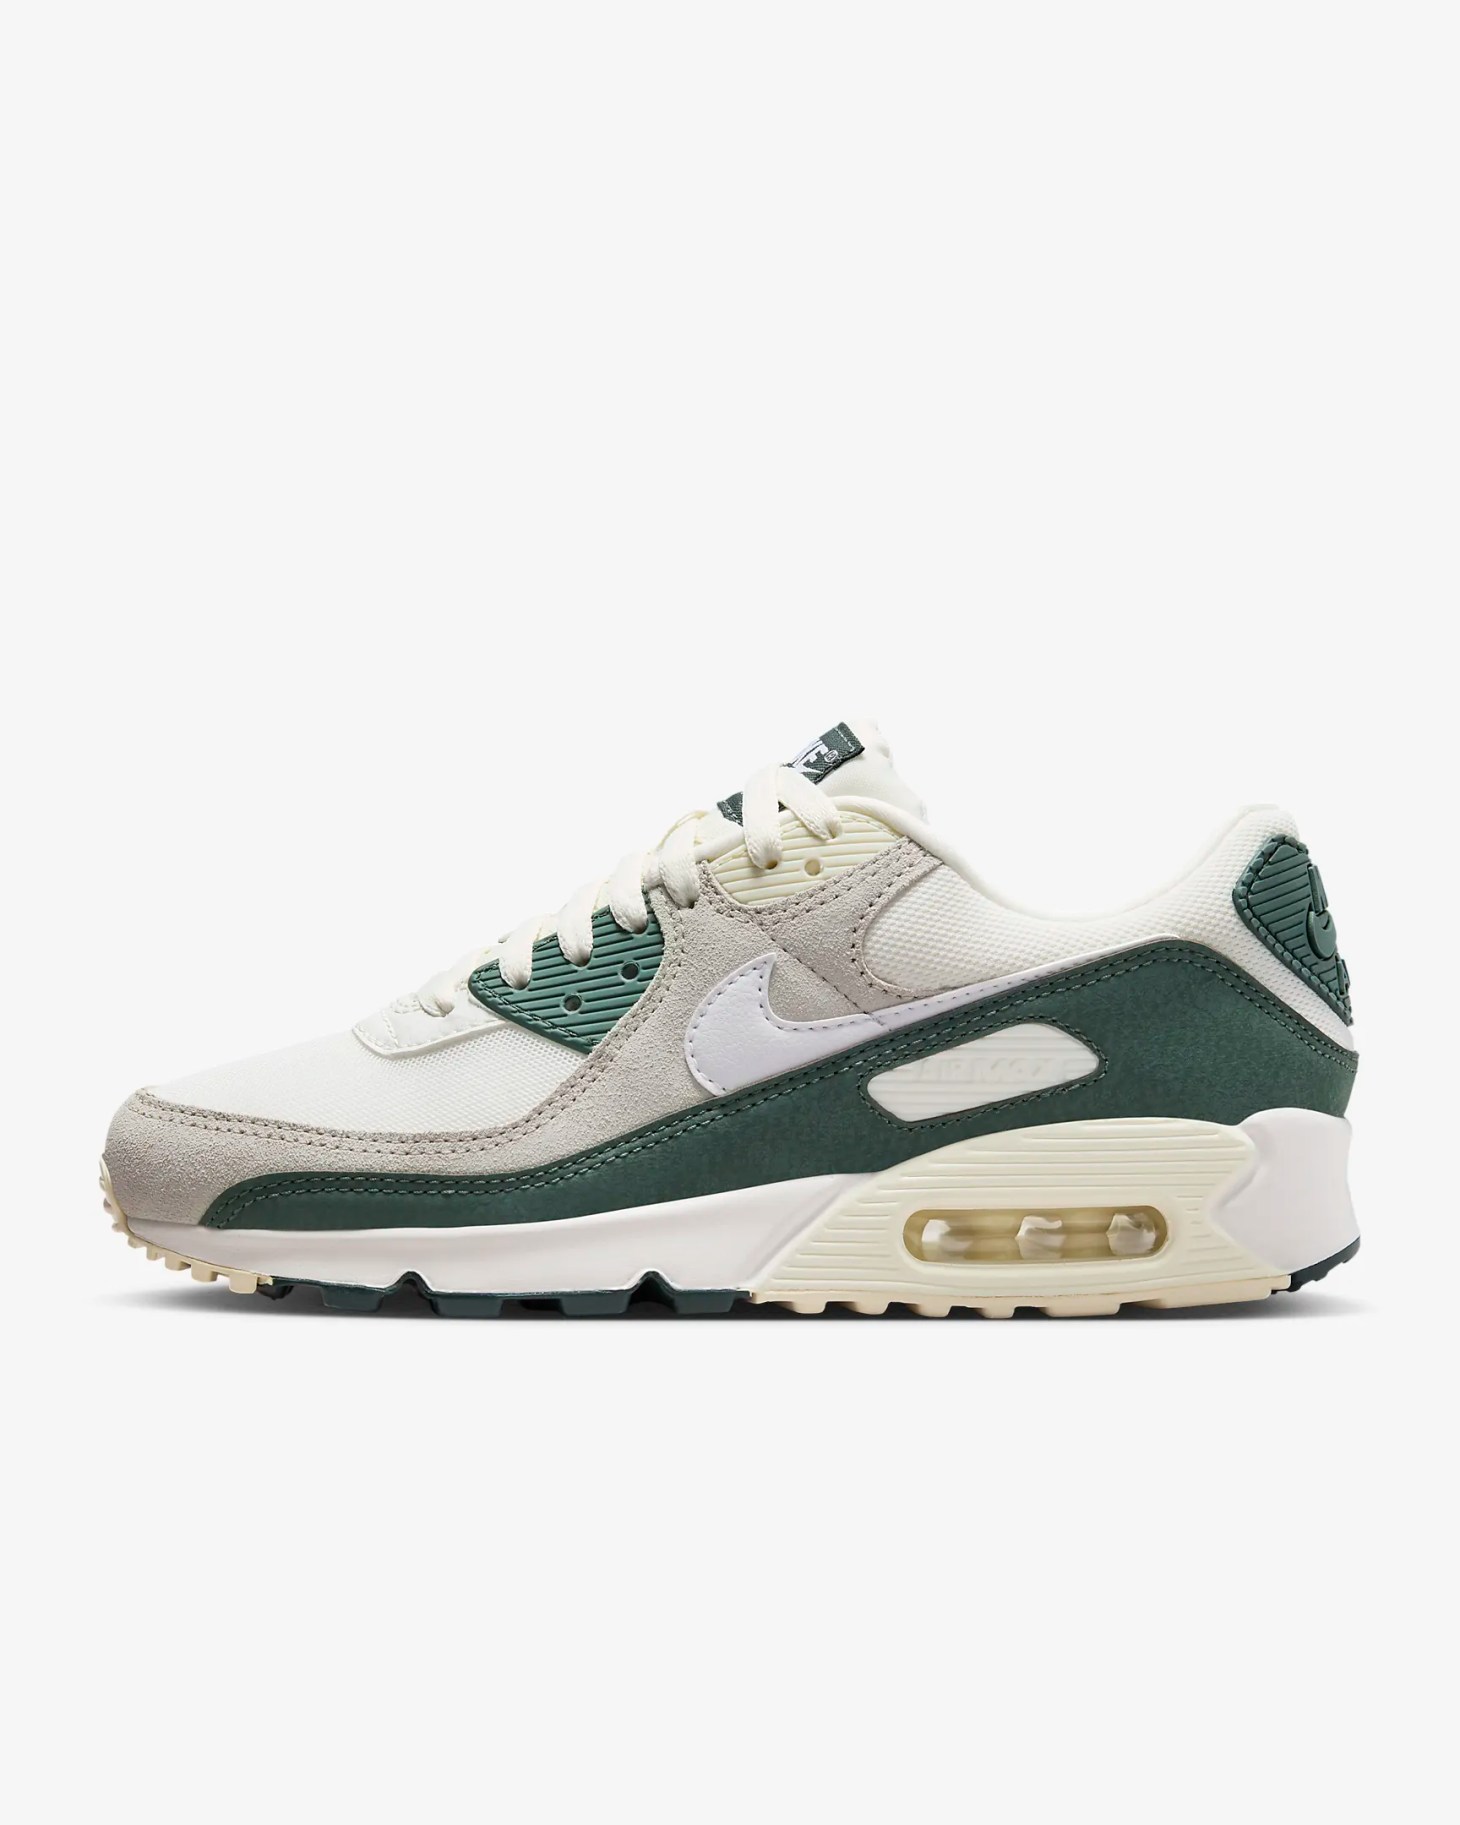 nike air max 90, one of the best nike walking shoes